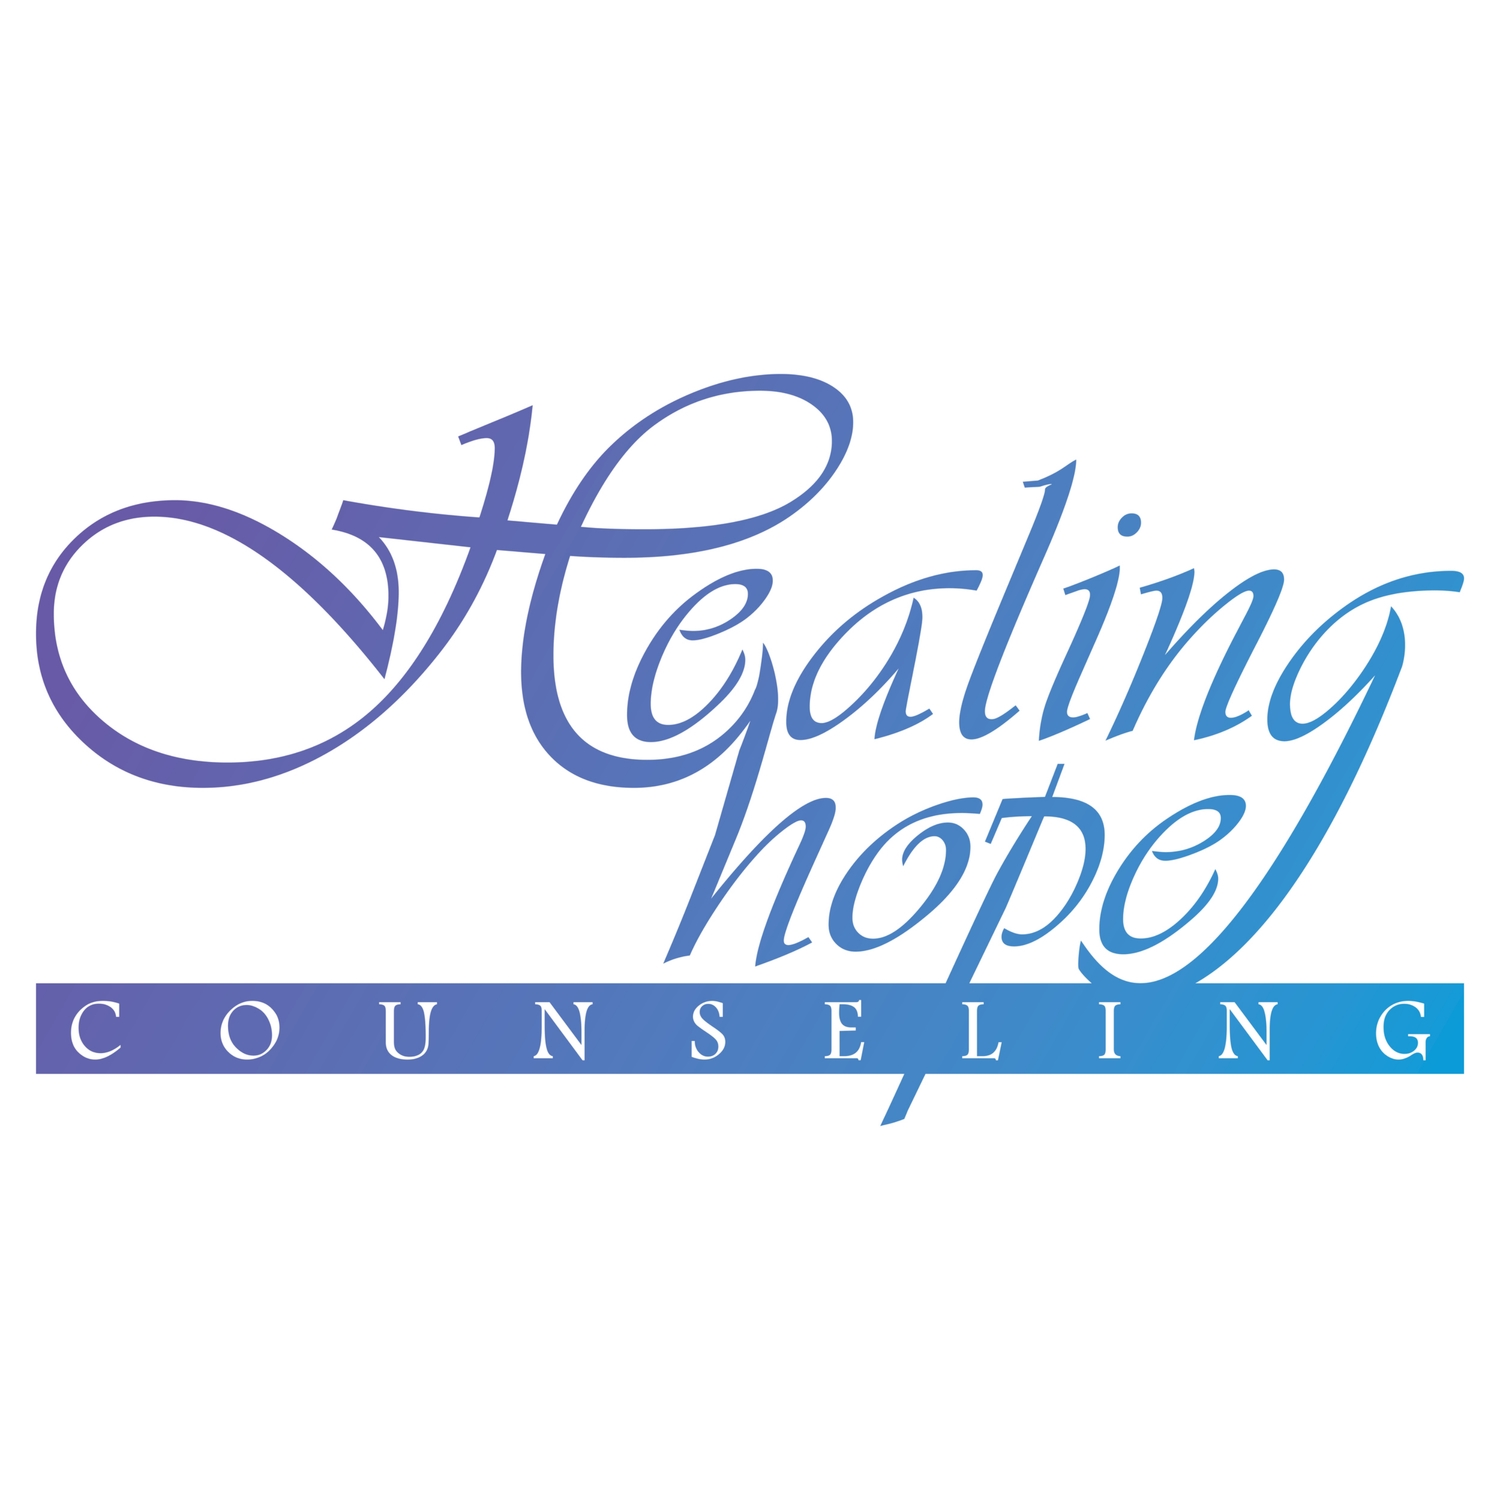 Healing Hope Counseling, PLLC